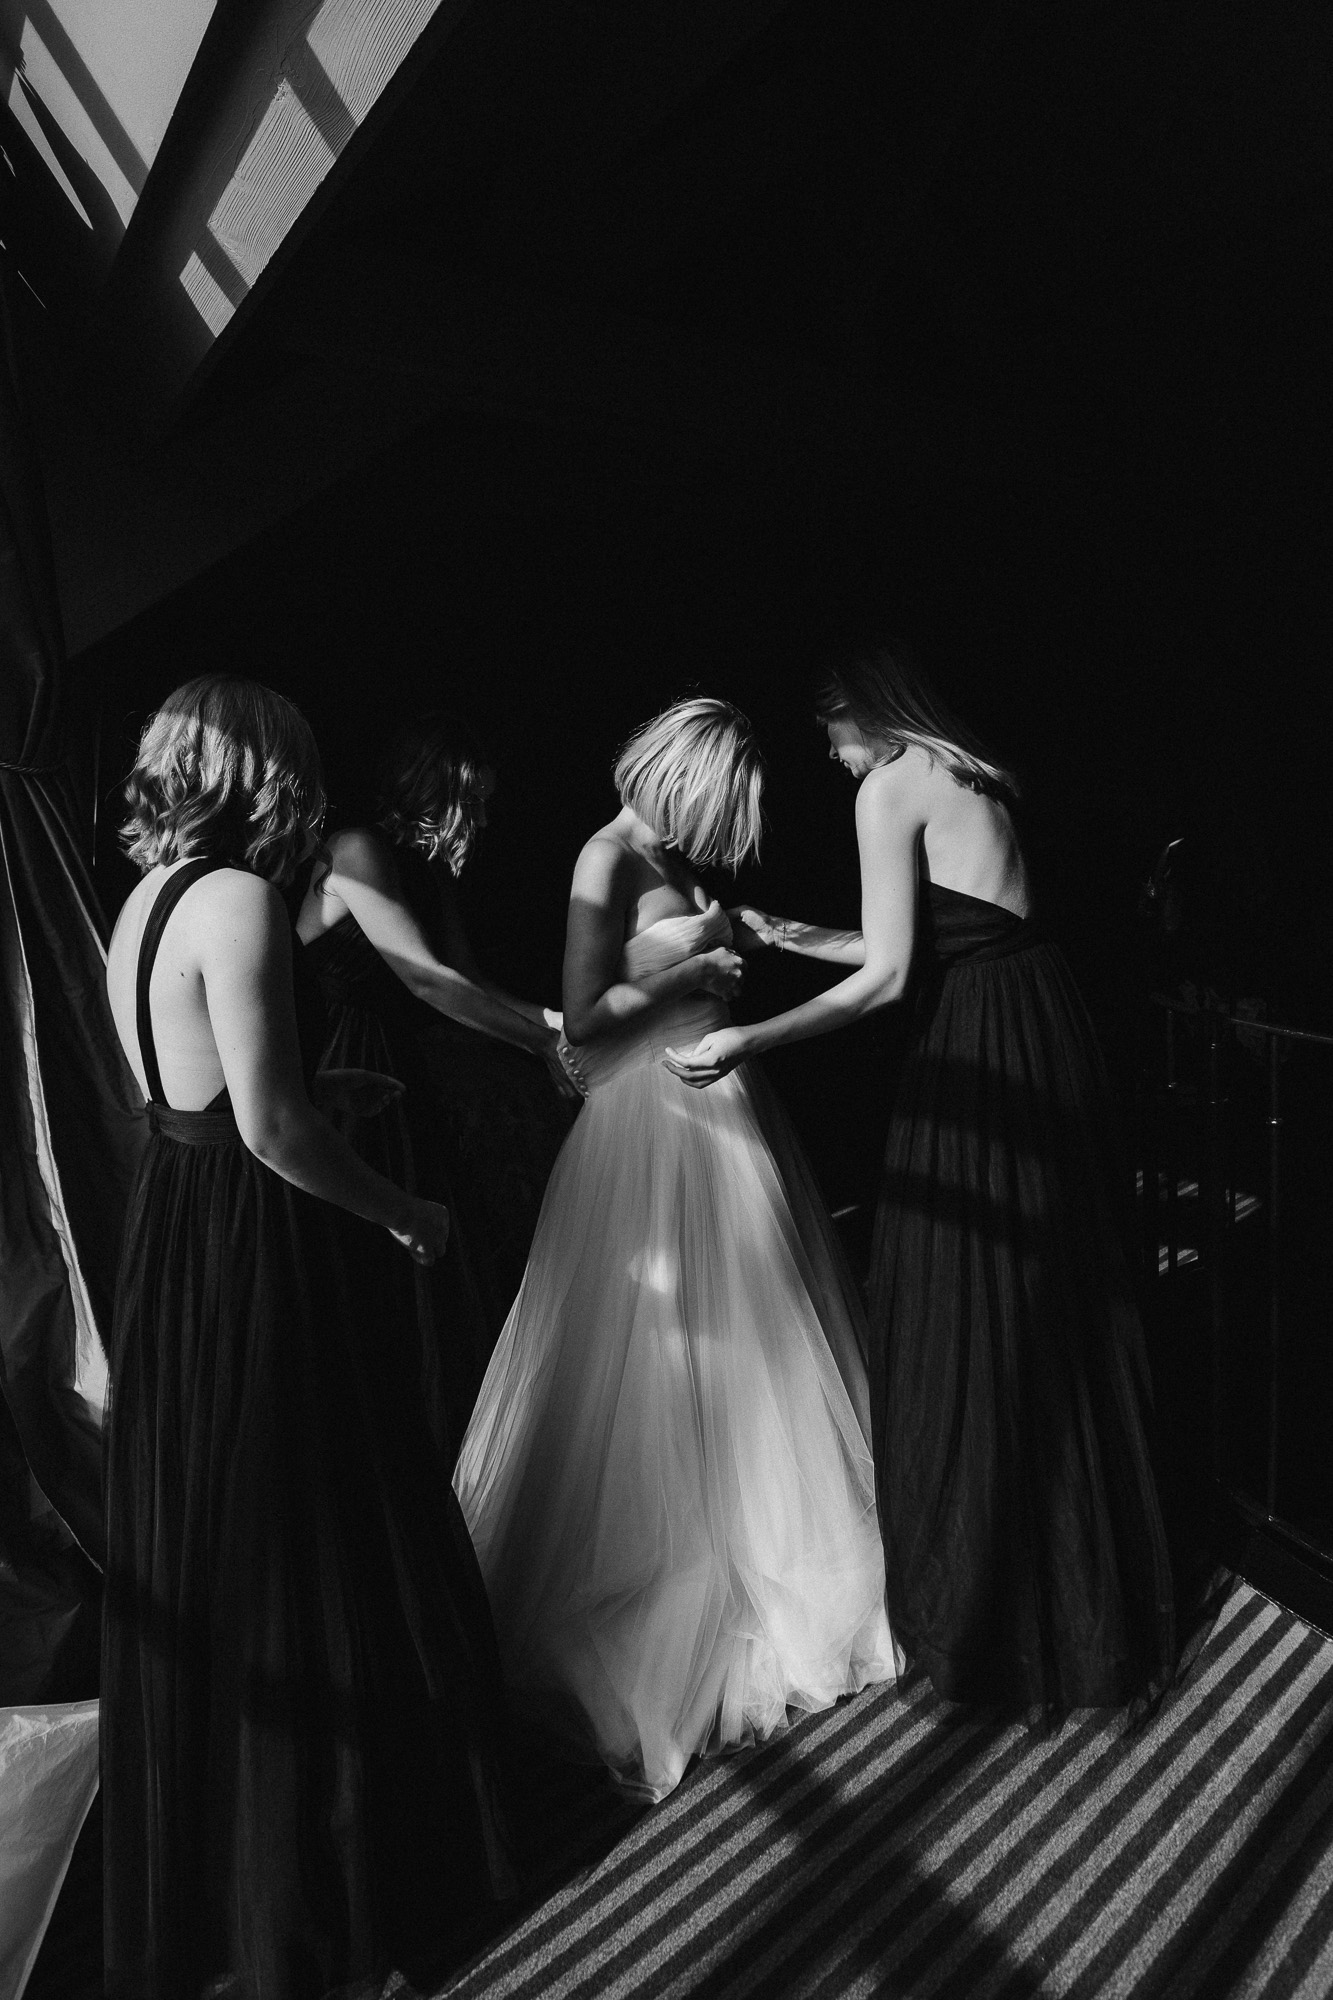 Paris wedding photographer: the bride is being helped into her lovely suzanne neville dress by her mum and bridesmaids